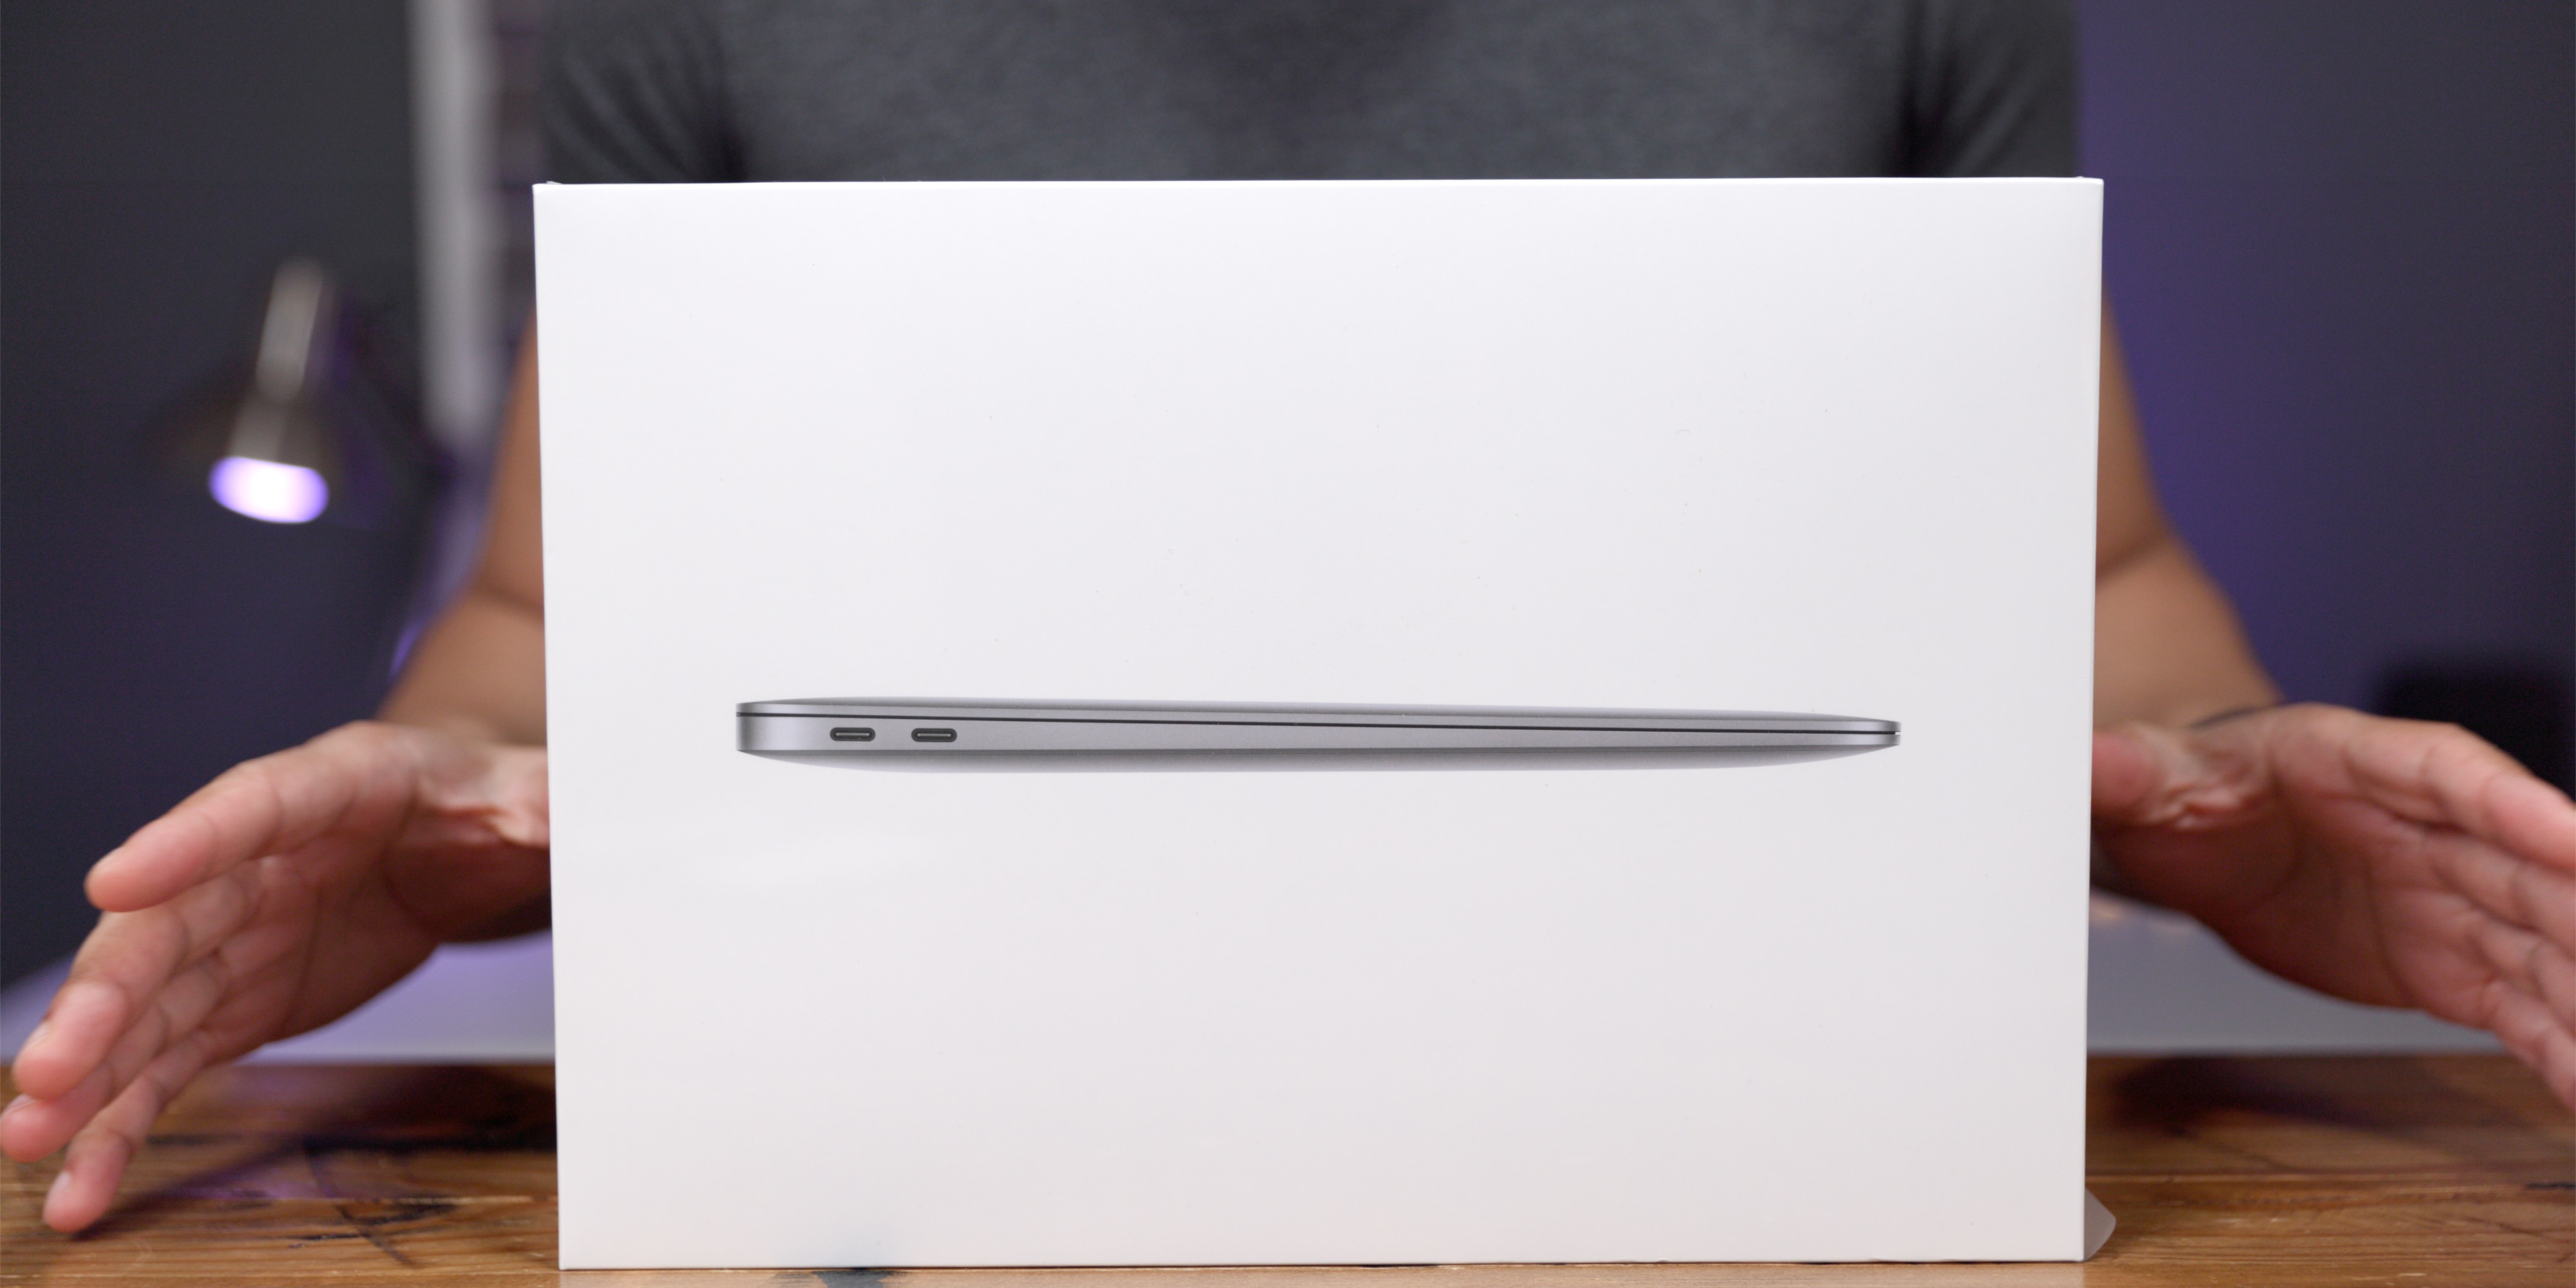 Hands-on with the new 15-inch MacBook Air [Gallery] - 9to5Mac